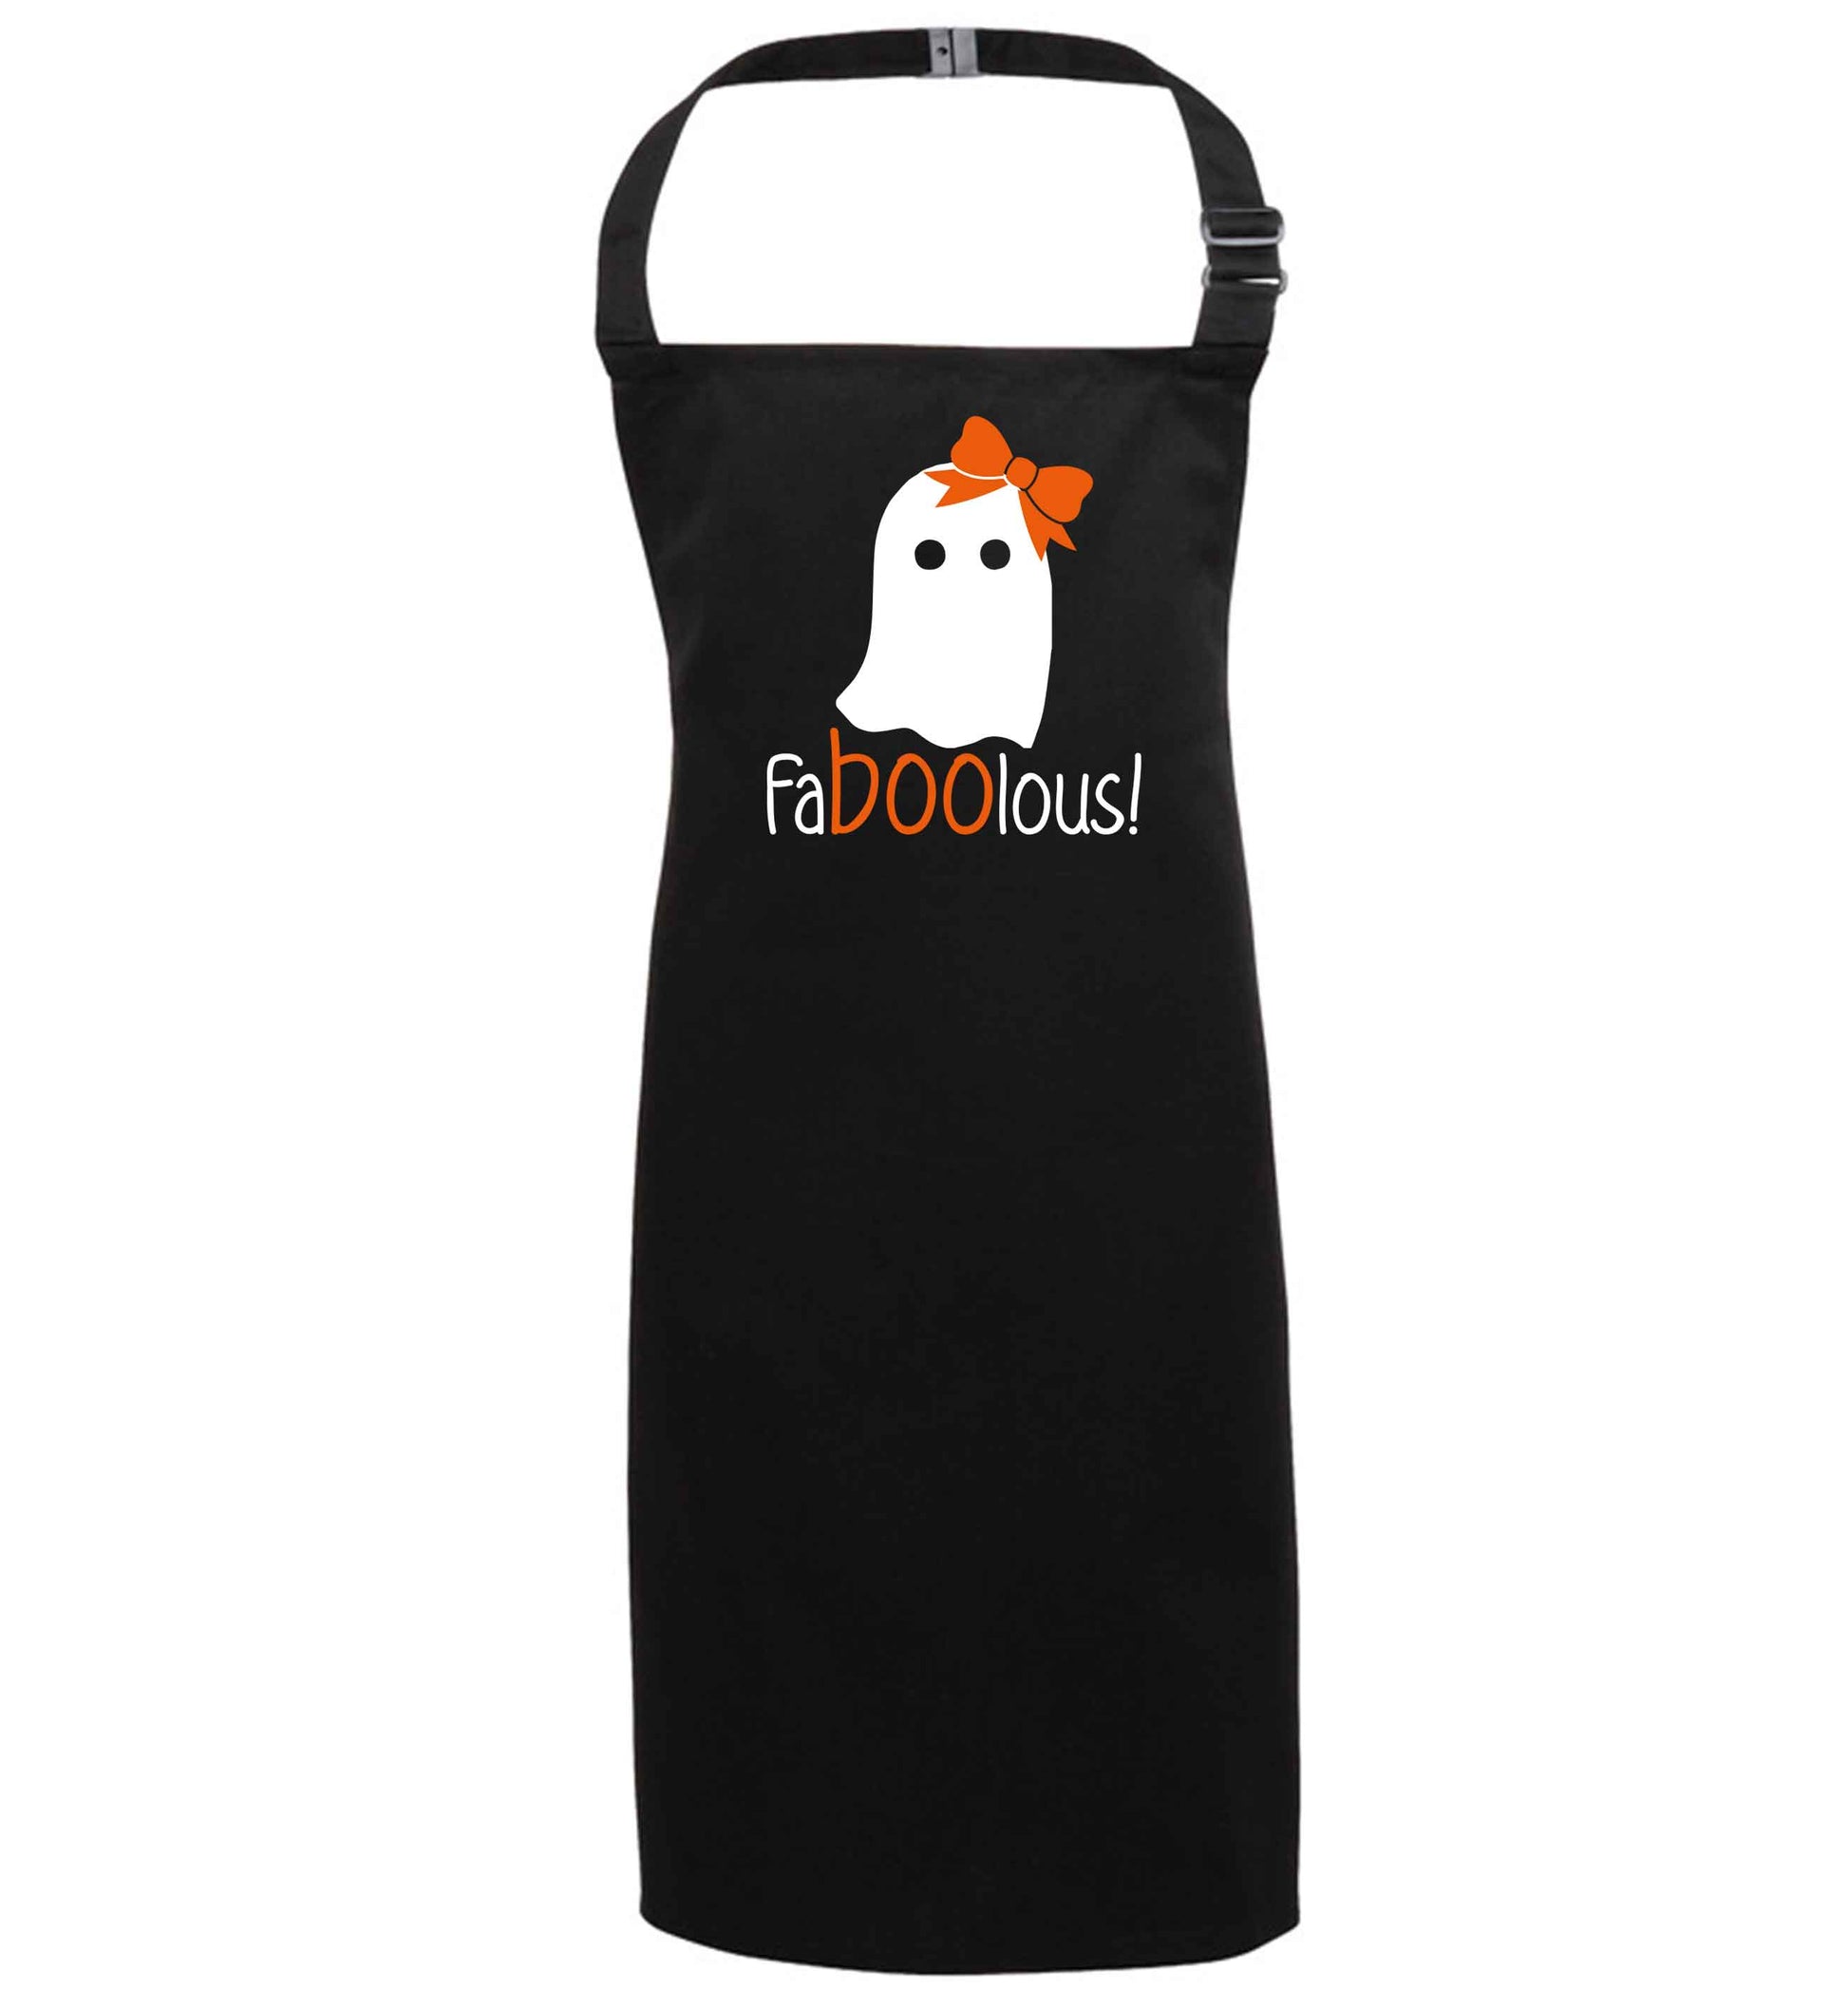 Faboolous ghost black apron 7-10 years